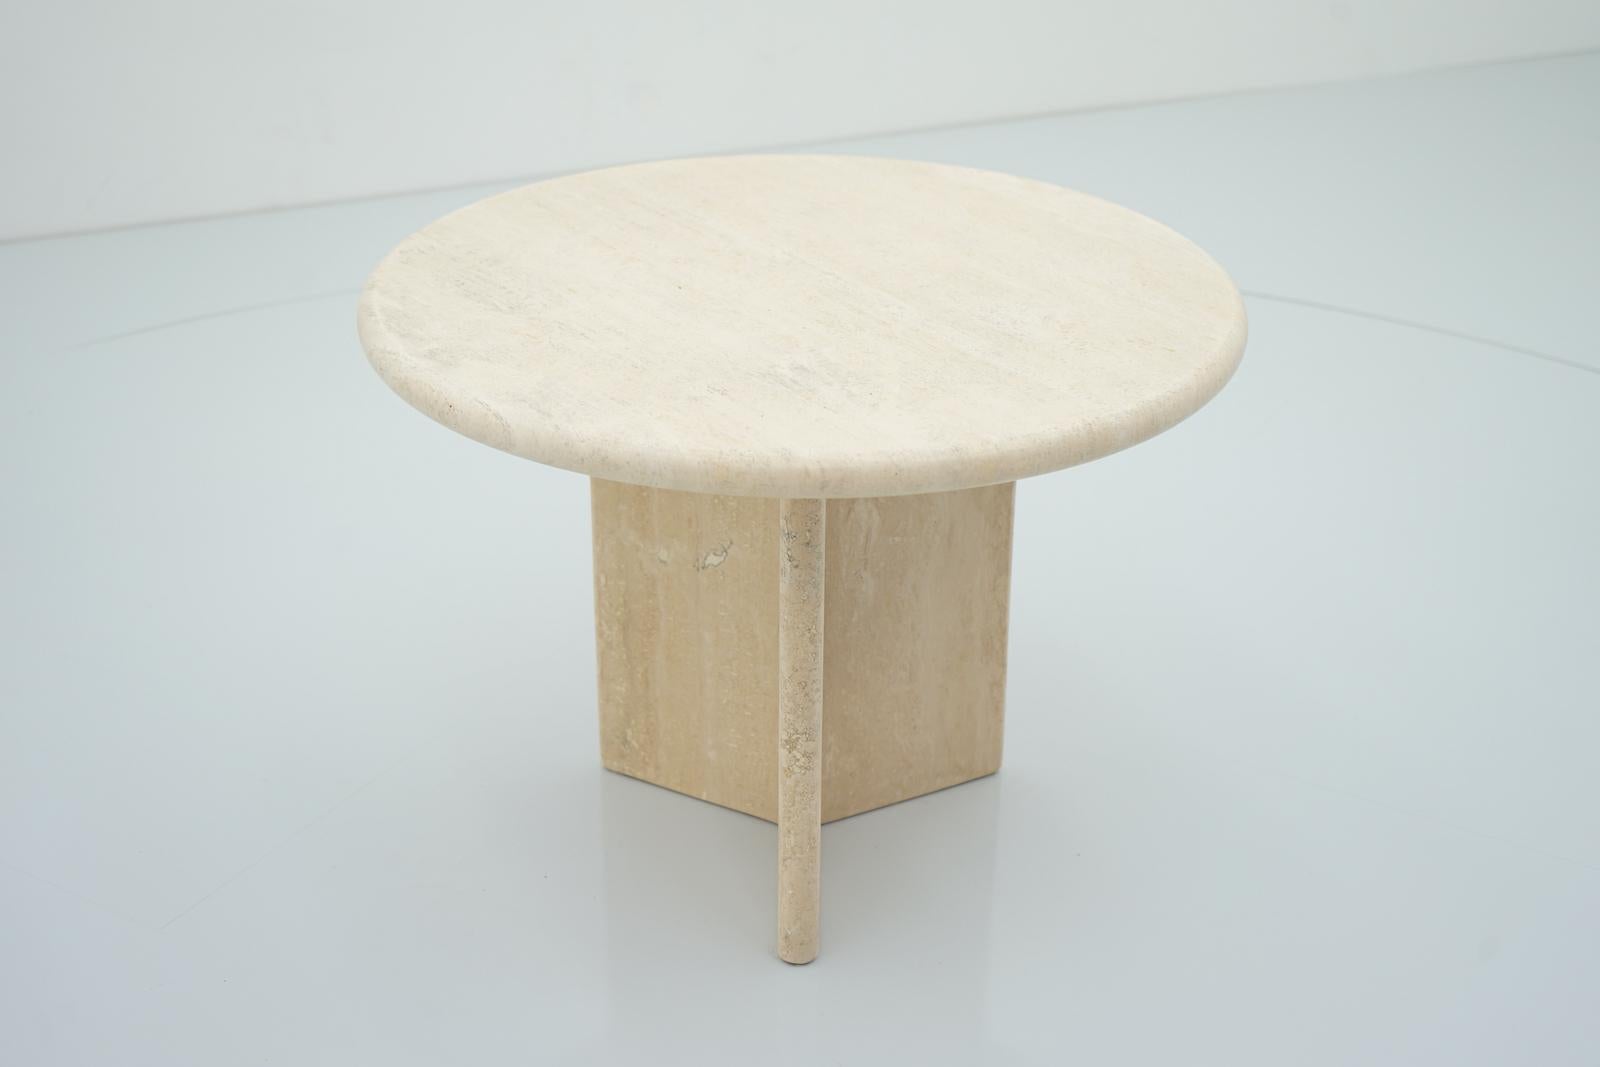 Circular side or small coffee table in beige Italian Travertine Stone, 1970s.
The table comes in two parts and will be shipped safe packed in two packages,
Very good condition.